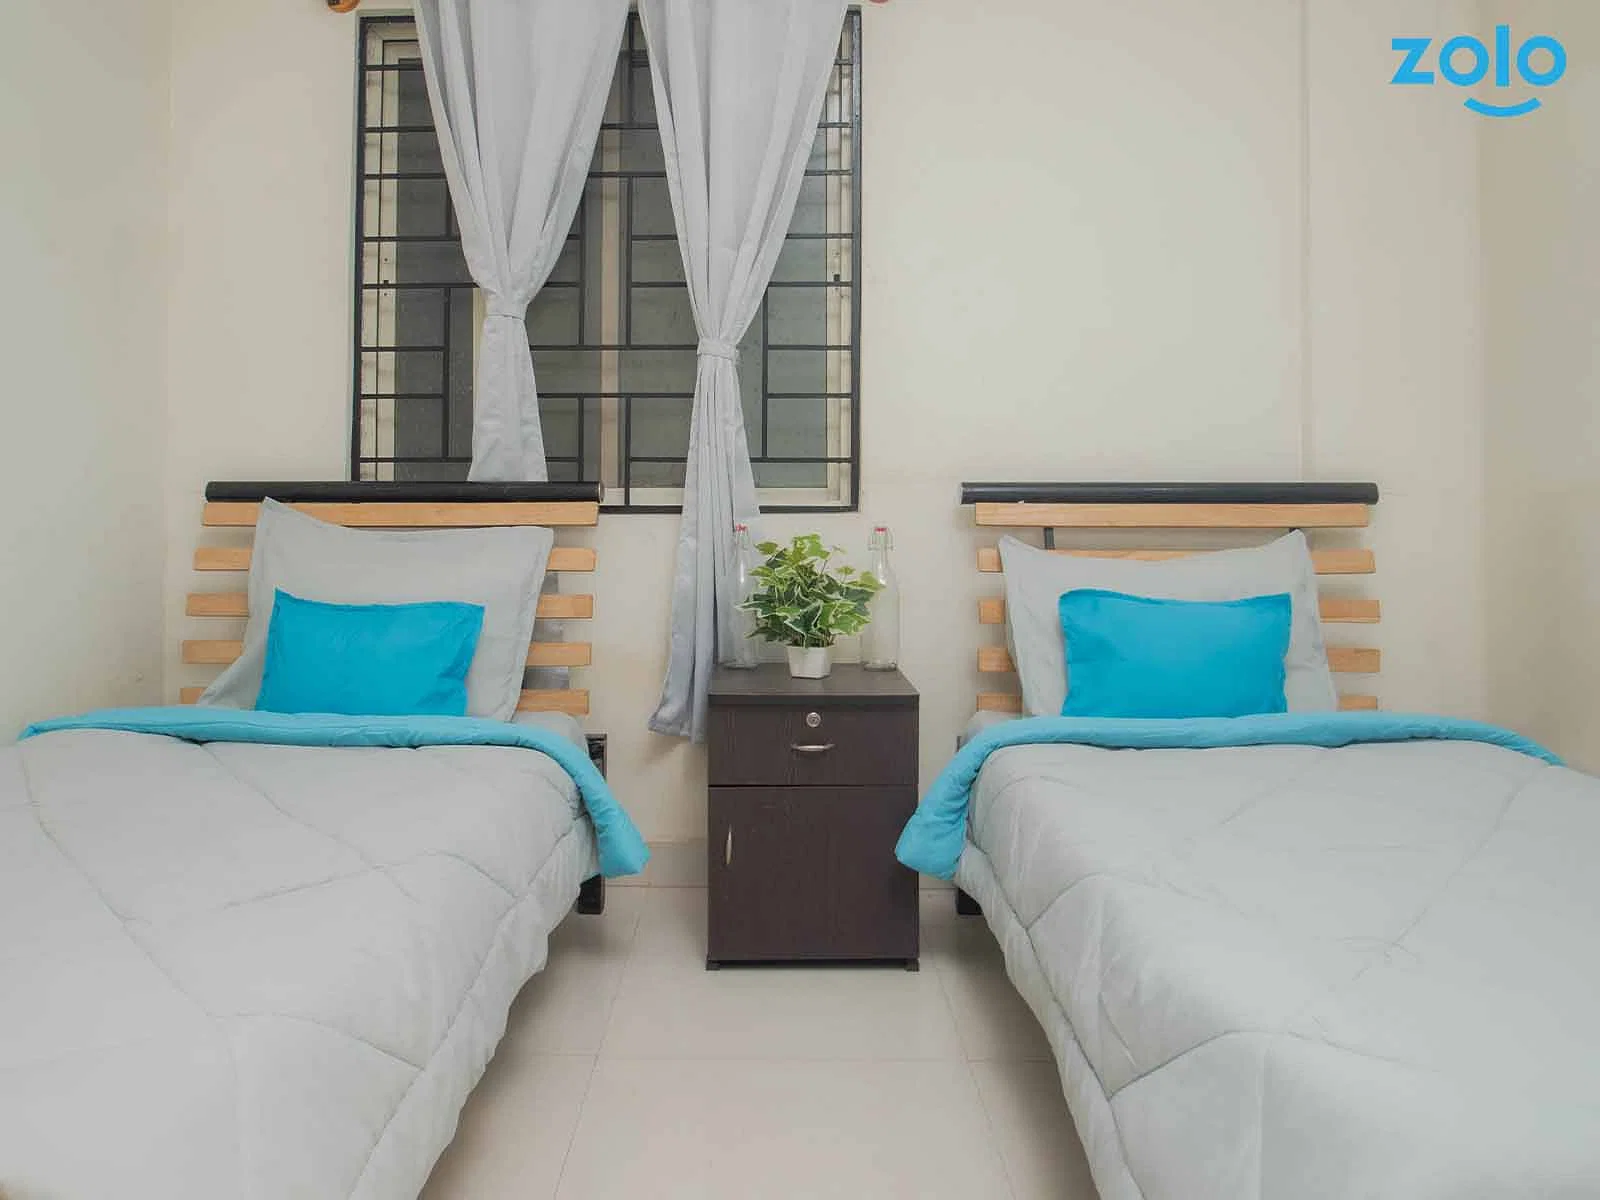 budget-friendly PGs and hostels for unisex with single rooms with daily hopusekeeping-Zolo Ginger